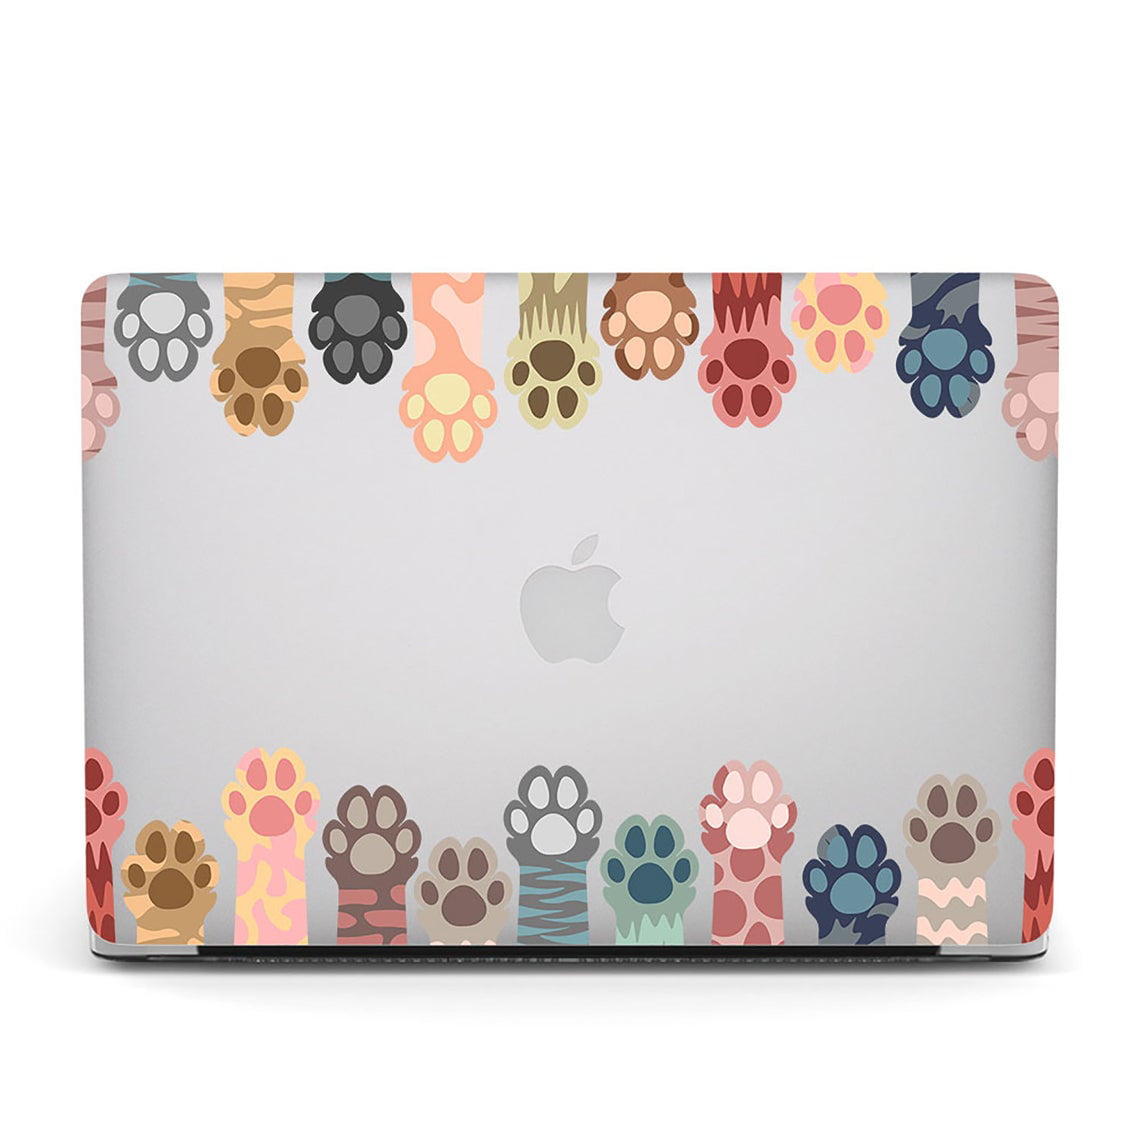 Kawaii Cats Laptop Case 13 Inch Carrying Case with Strap 